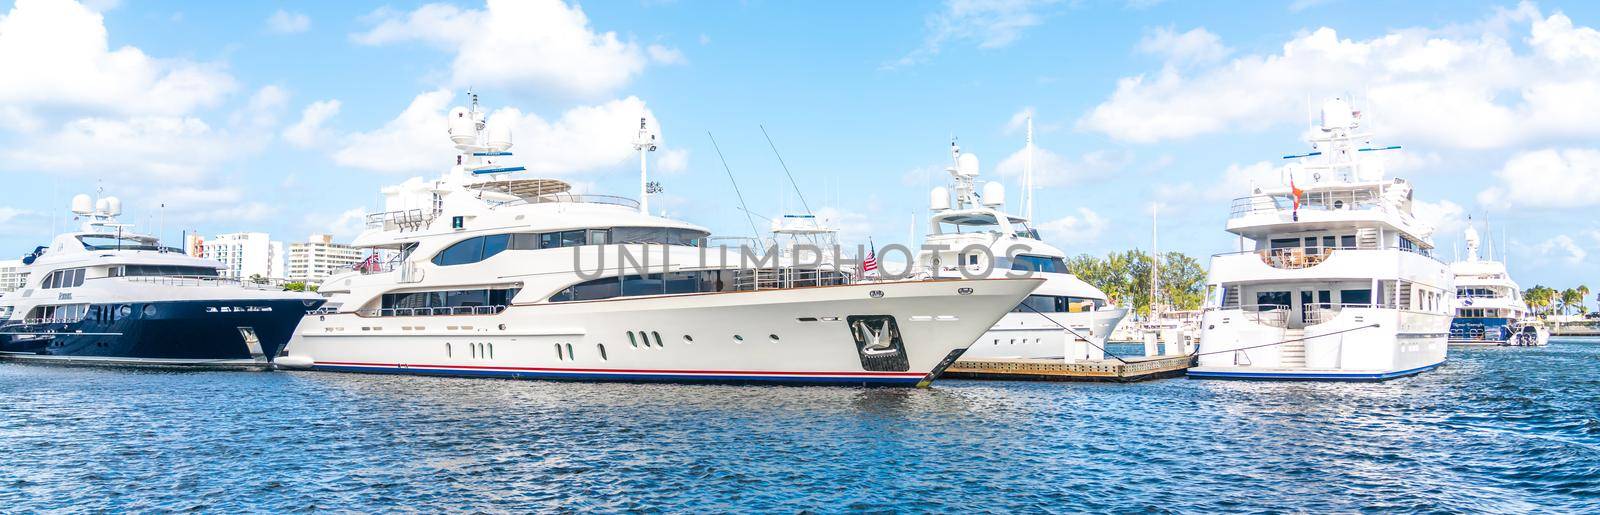 Fort Lauderdale, Florida, USA - September 20, 2019: Panorama of yachts docked in marina in Fort Lauderdale, Florida by Mariakray